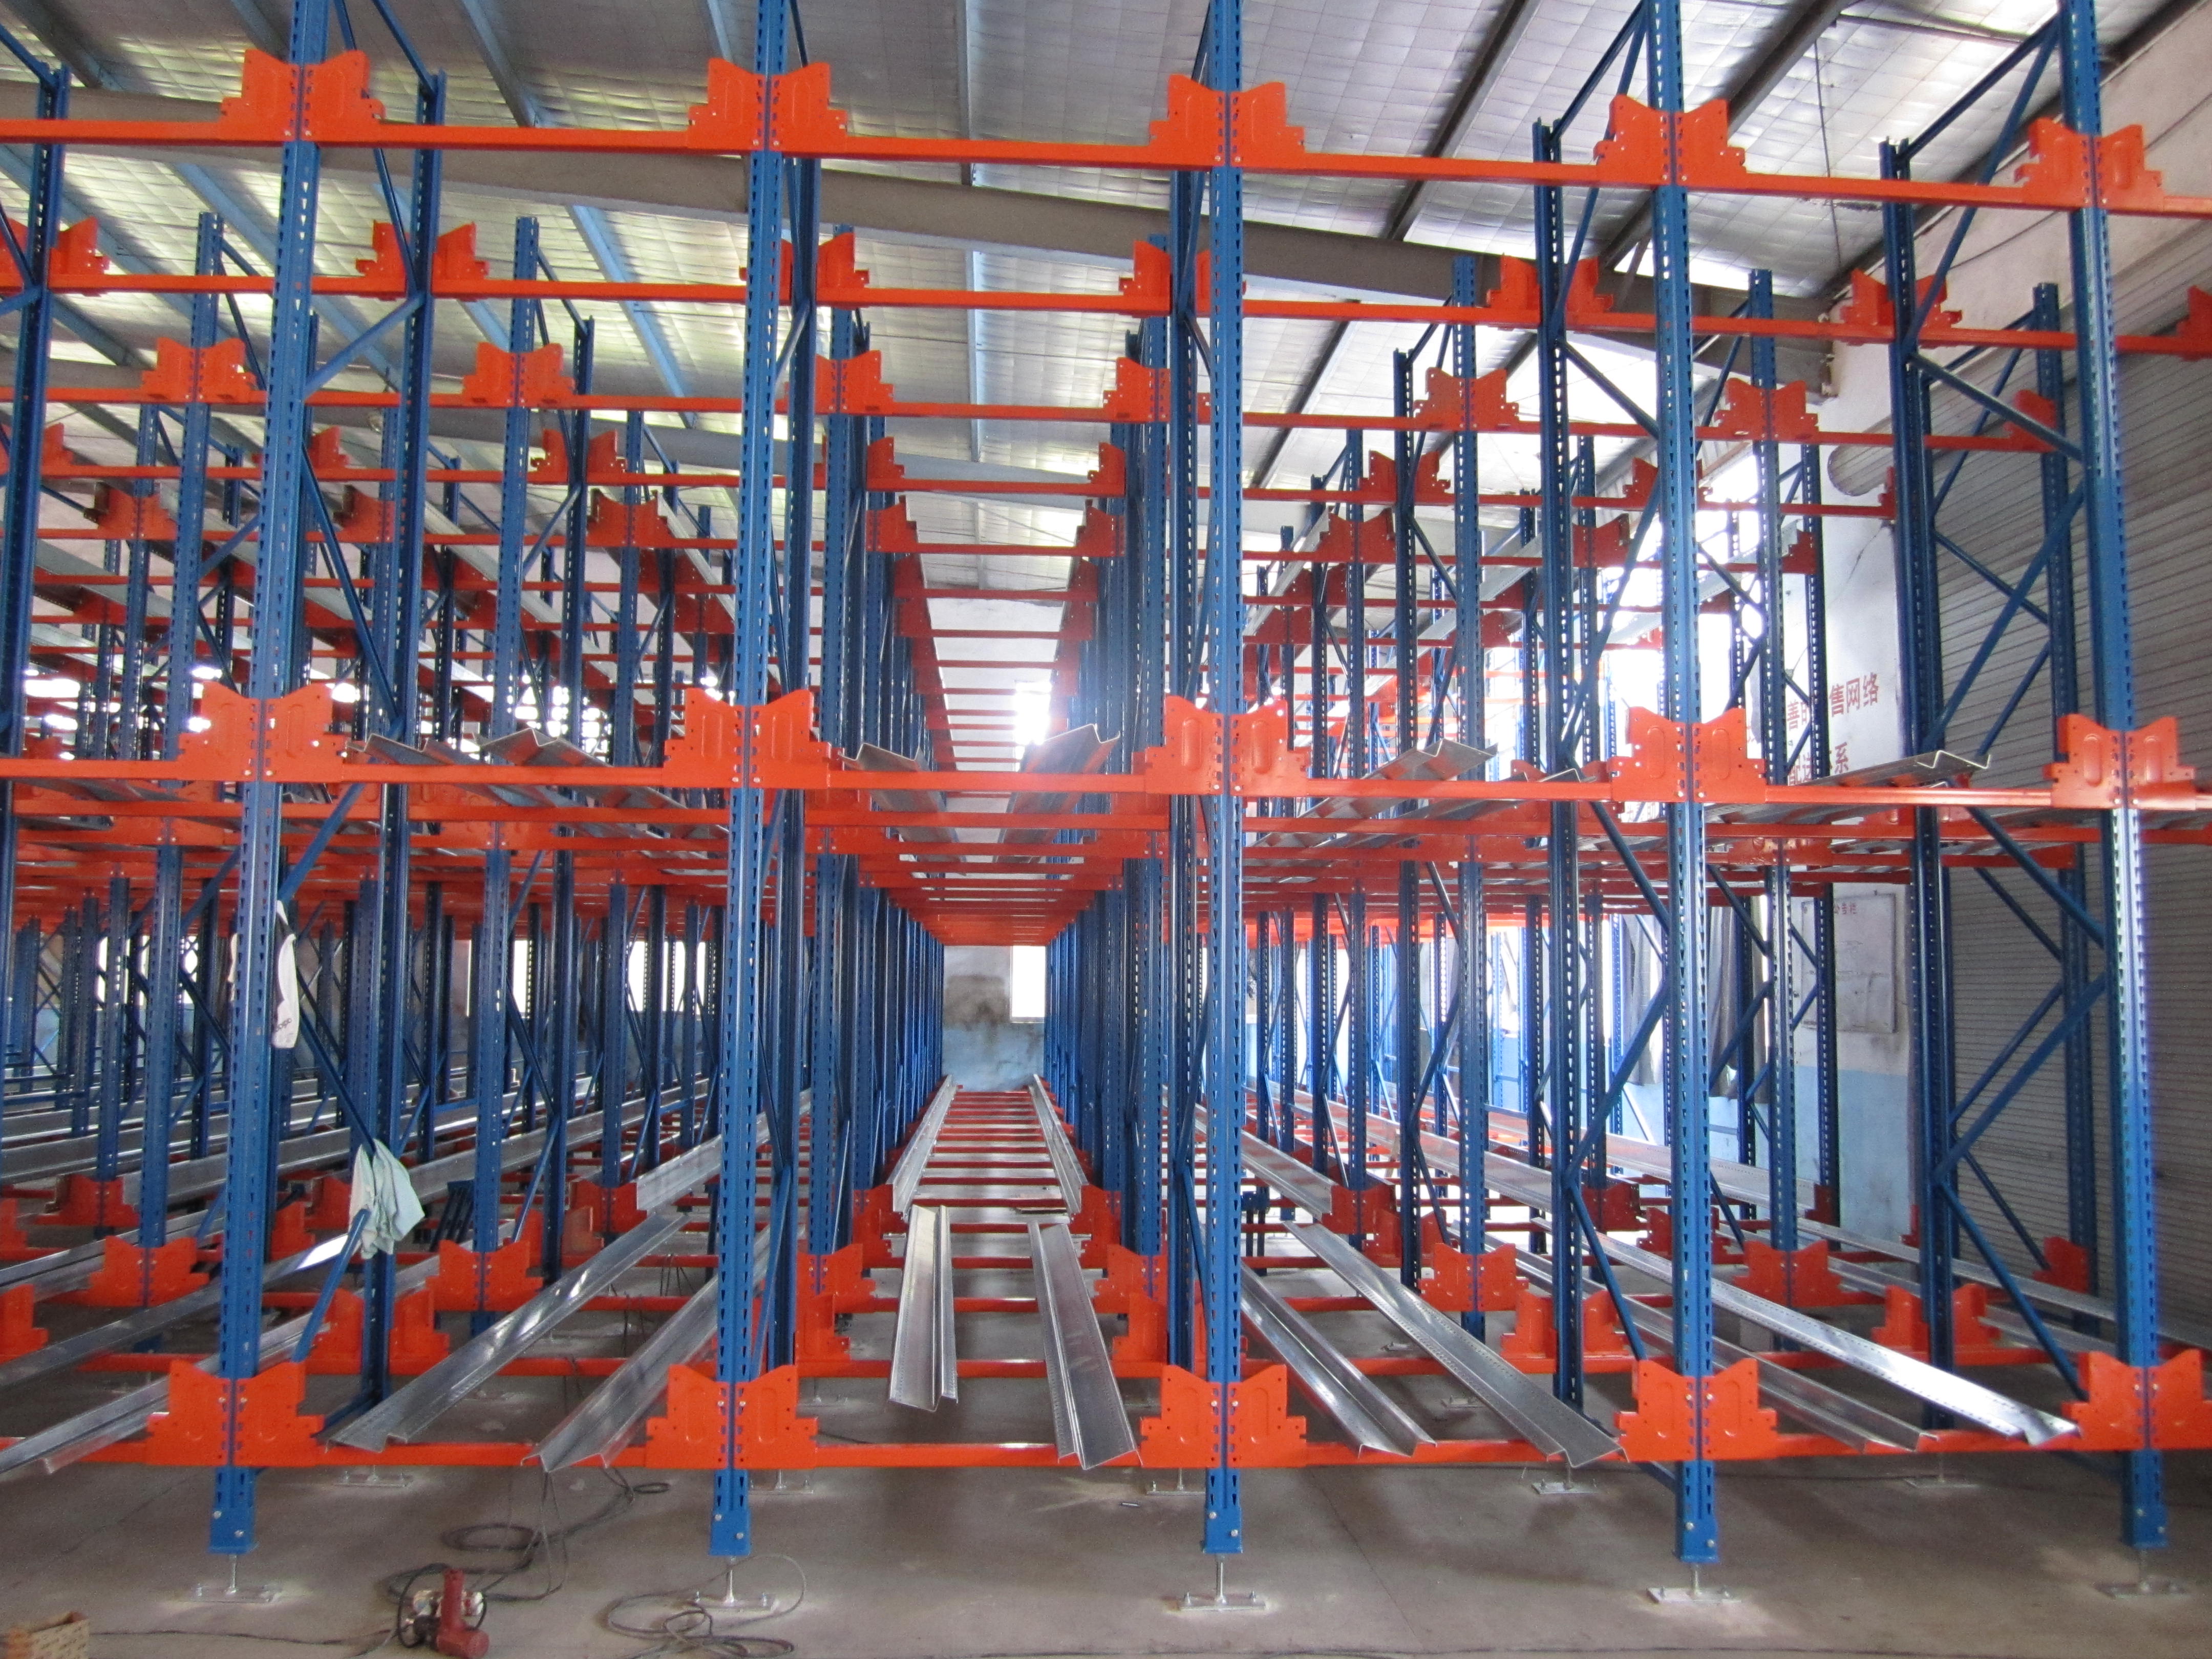 Mezzanine floor versus radio shuttle racking, which is better? (Comparing differences and advantages)